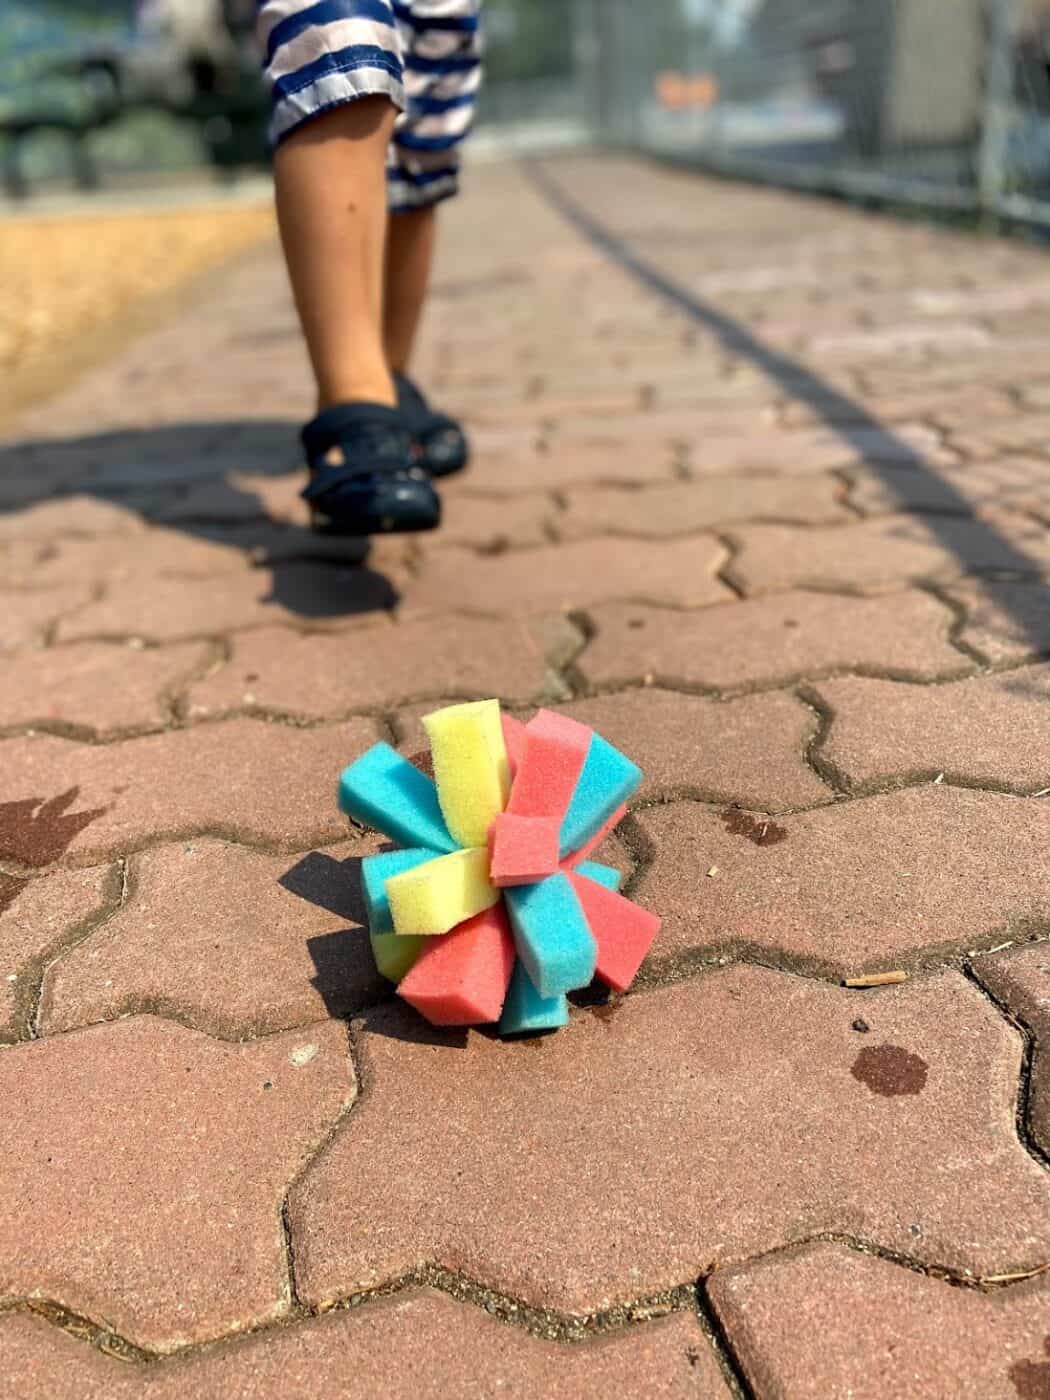 Child walking towards a blue, red, and yellow star made of sponges.